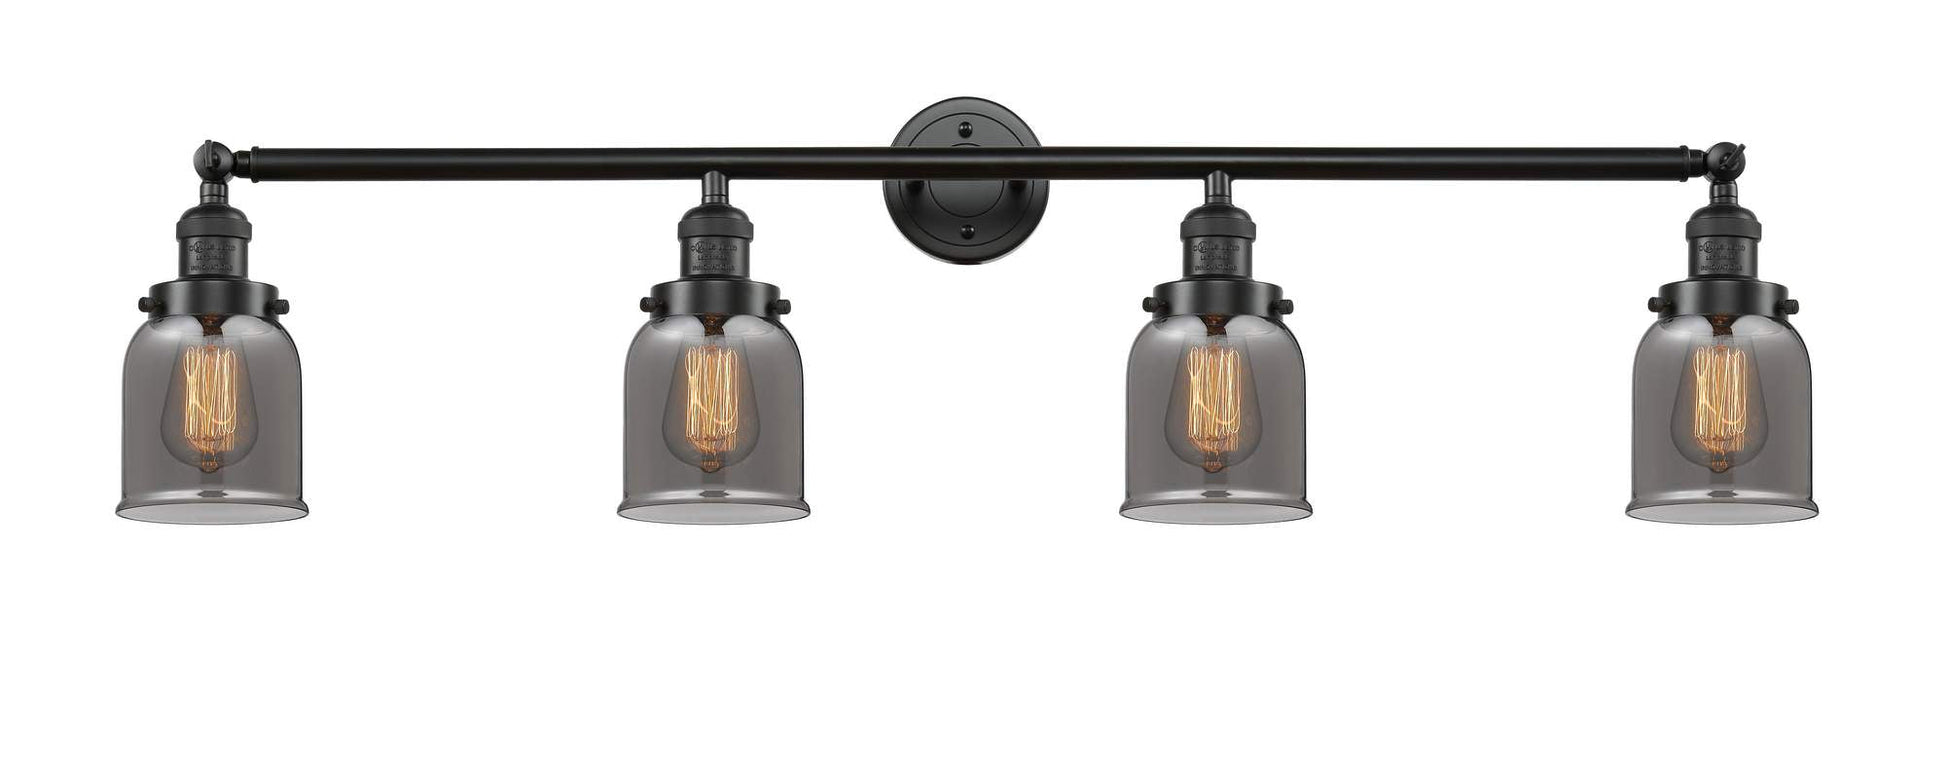 215-OB-G53 4-Light 42" Oil Rubbed Bronze Bath Vanity Light - Plated Smoke Small Bell Glass - LED Bulb - Dimmensions: 42 x 7 x 9.75 - Glass Up or Down: Yes